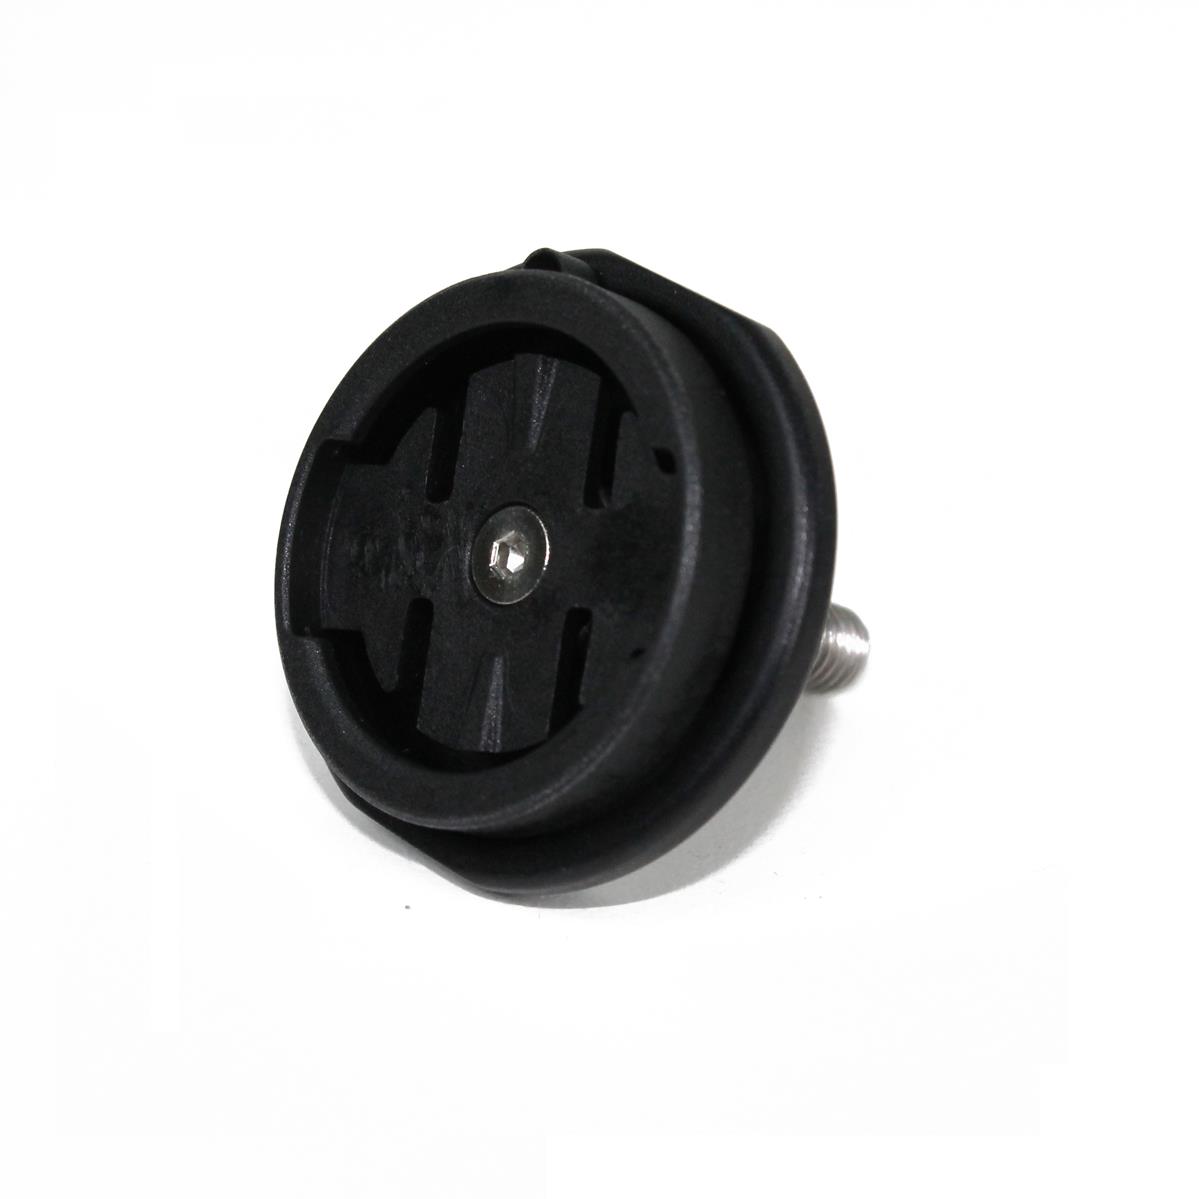 Ahead steering cap with Garmin connection